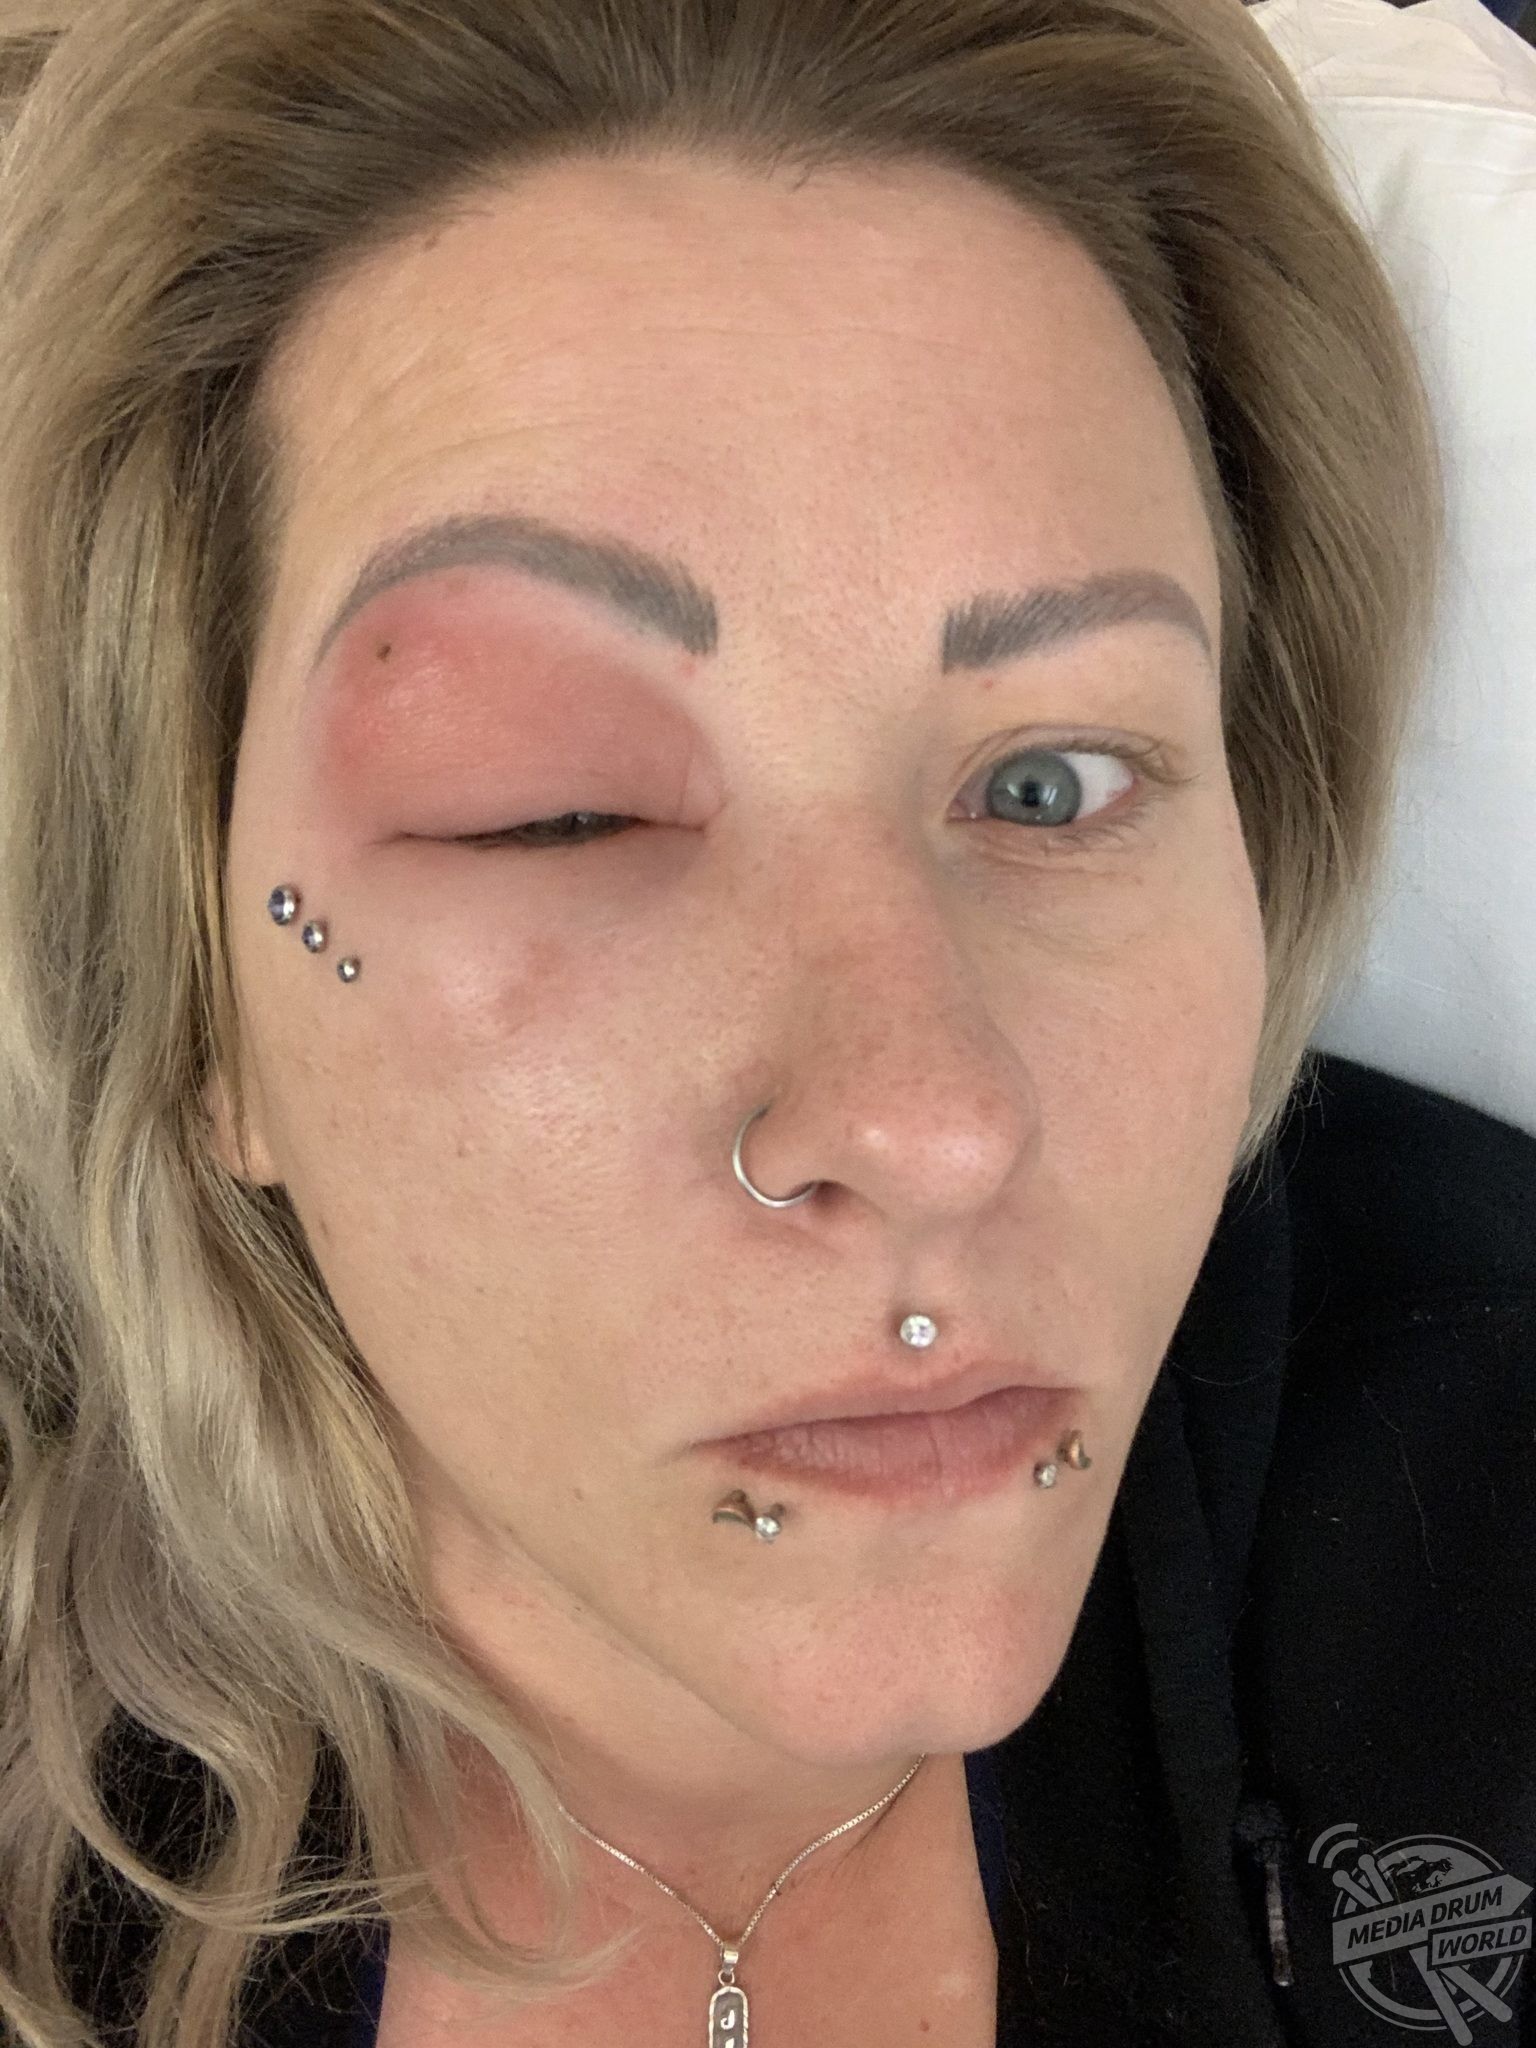 Hairdresser Nearly Lost Her Eye After Hair Splinter Caused Infection |  Media Drum World